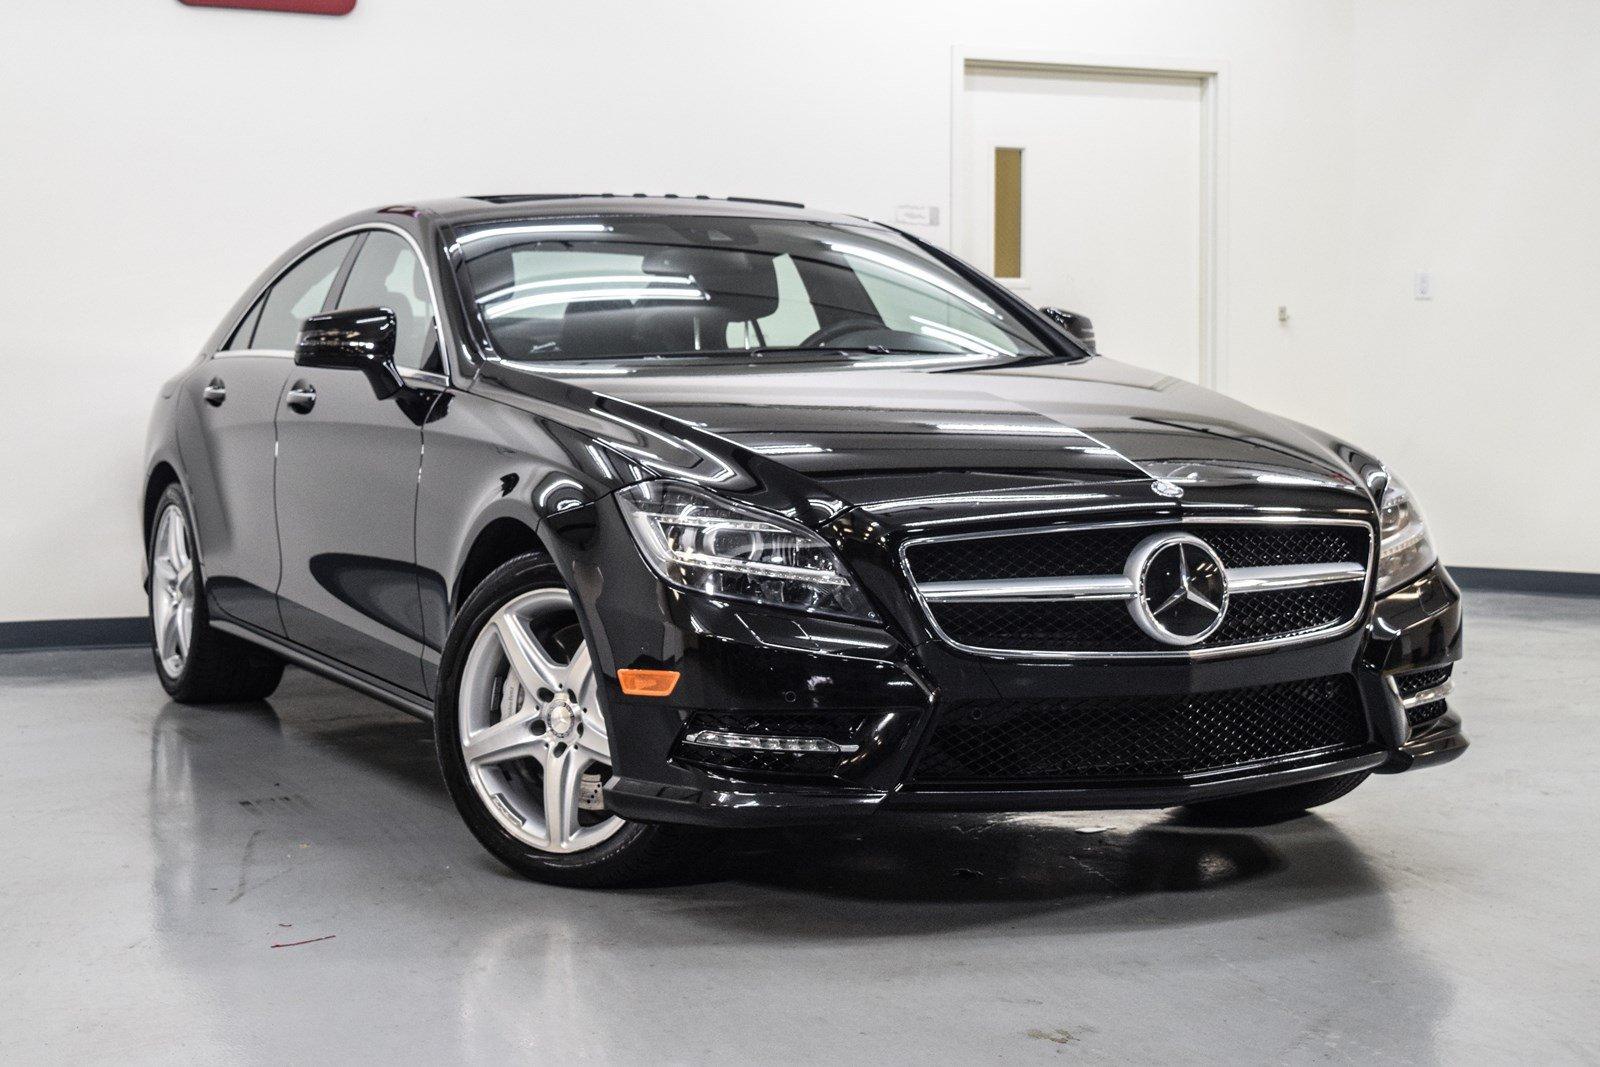 Used 2013 Mercedes-Benz CLS-Class CLS550 for sale Sold at Gravity Autos Marietta in Marietta GA 30060 2